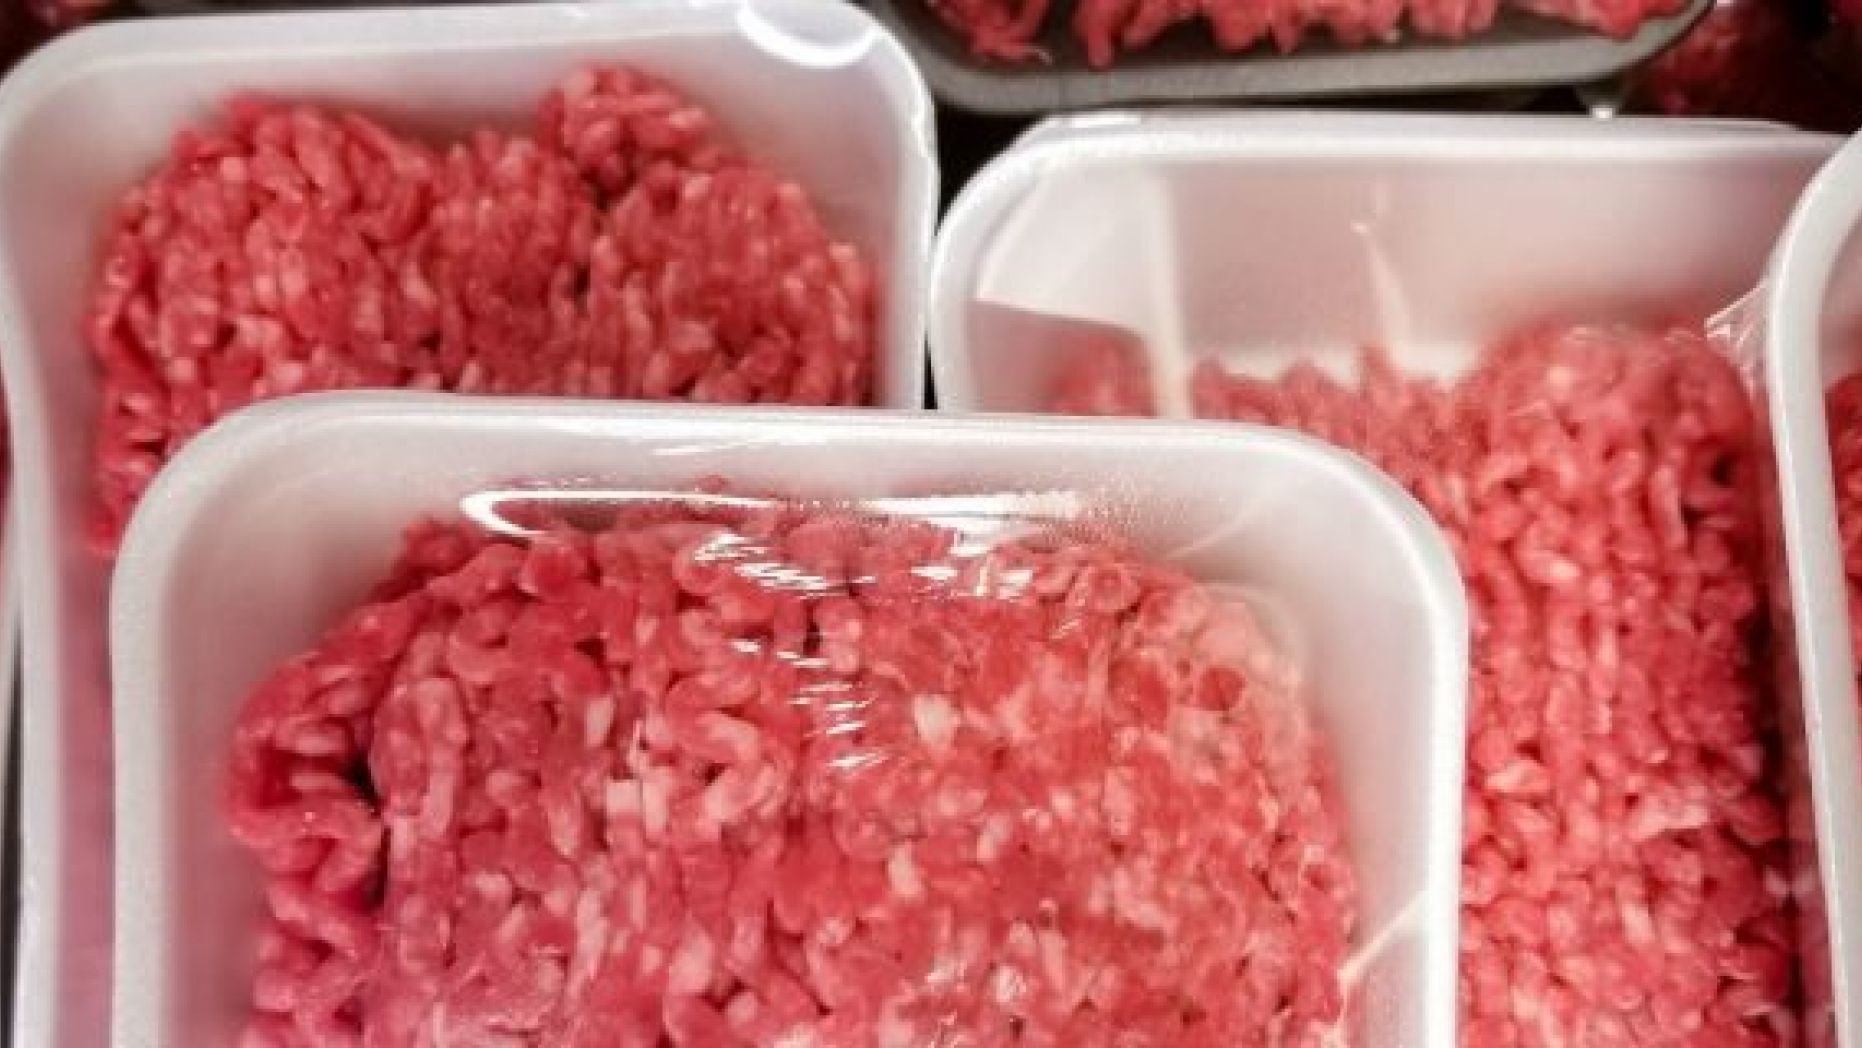 Approximately 4,838 pounds of beef products from the Aurora Packing Company, Inc. in North Aurora, Ill., are being recalled because of a possible E. coli contamination, according to the USDA.